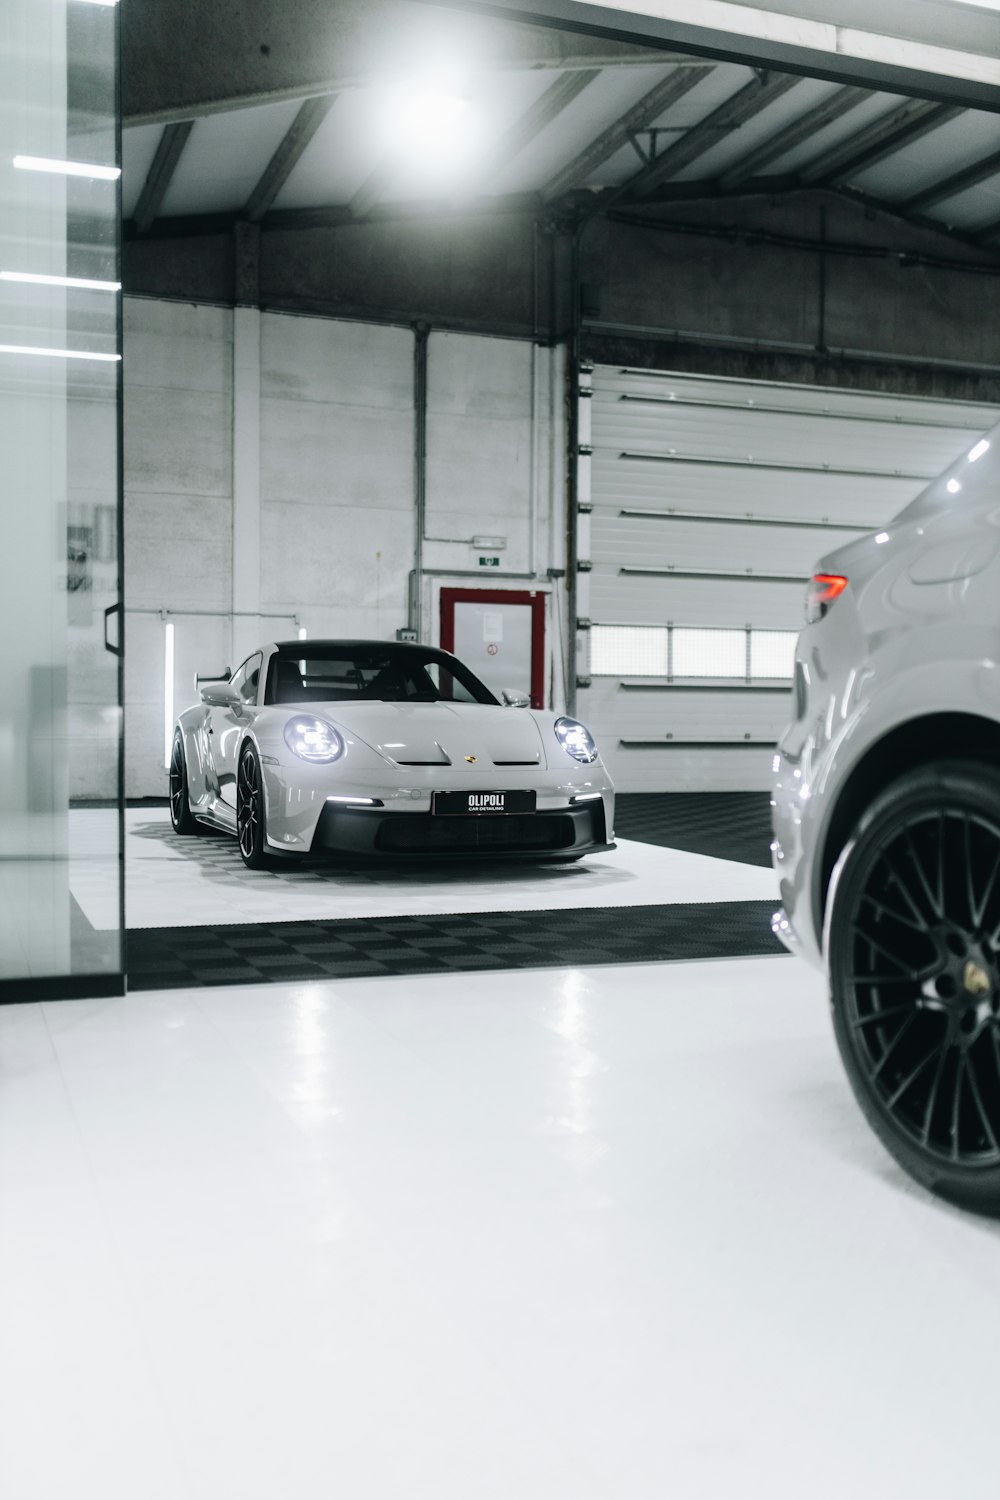 a white sports car parked in a garage